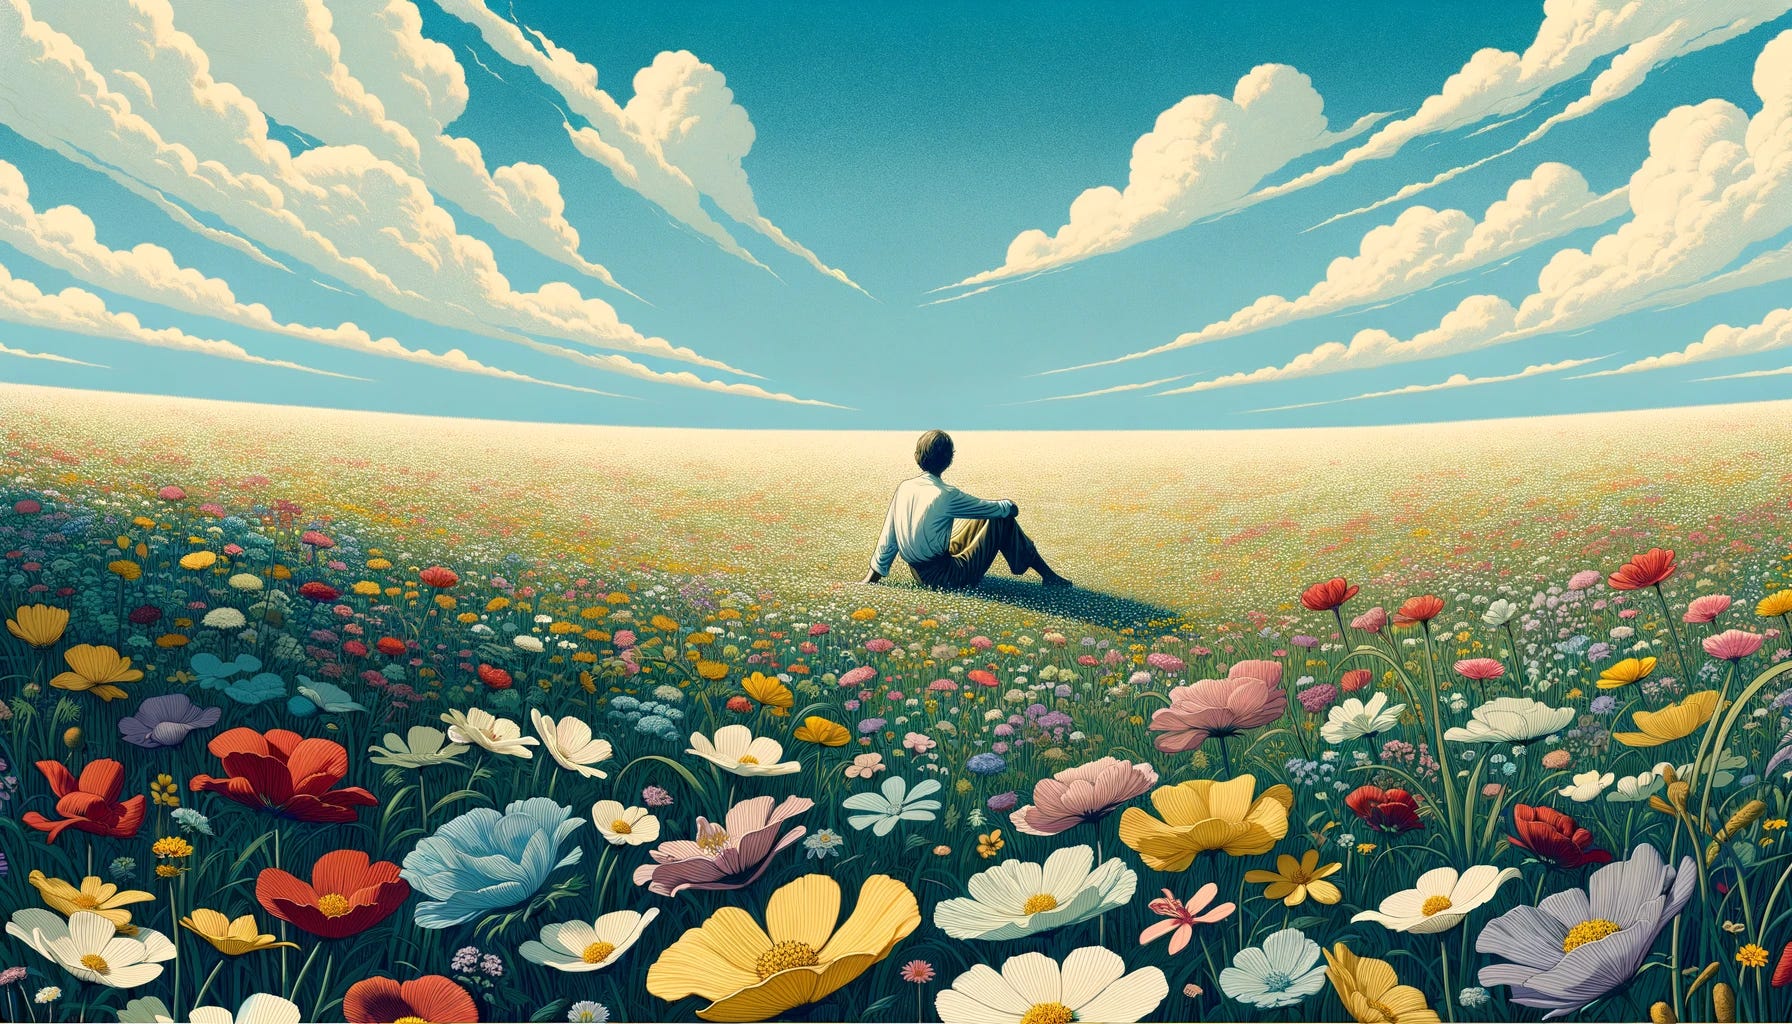 An elegant and sophisticated illustration depicting a person sitting serenely in a vast field of vibrant flowers, under a clear blue sky. The style is reminiscent of illustrations found in The New Yorker magazine, known for its artistic and thoughtful approach to visual storytelling. The scene is peaceful and idyllic, with the person appearing relaxed and contemplative, perhaps enjoying a moment of solitude amidst the beauty of nature. The composition balances detail and simplicity, with a focus on conveying a sense of tranquility and connection to the environment. The color palette is rich yet subdued, featuring a variety of flower colors against the green of the field and the blue sky, aiming to capture the viewer's imagination and evoke a sense of calm. The image is designed with a 16:9 aspect ratio, perfect for a wide and immersive view of the scene.